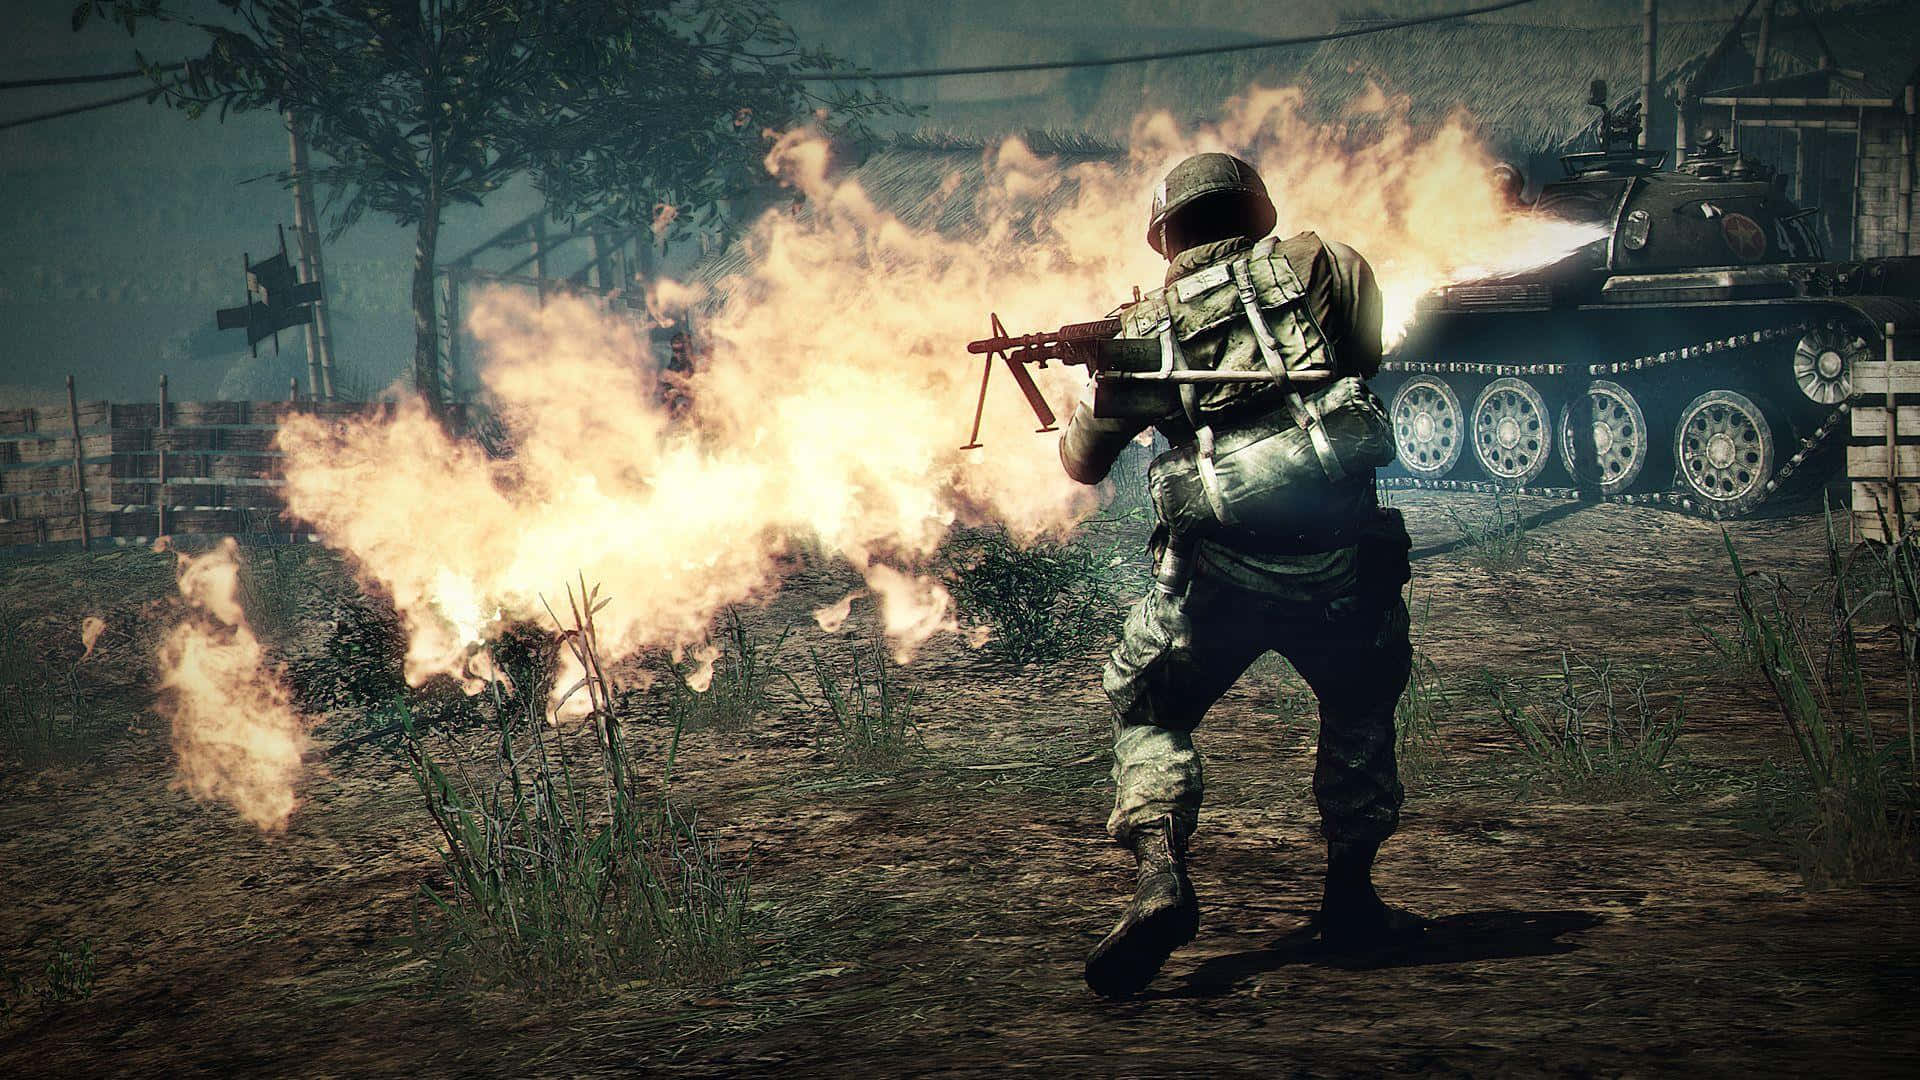 A Soldier Is Holding A Gun In Front Of A Fire